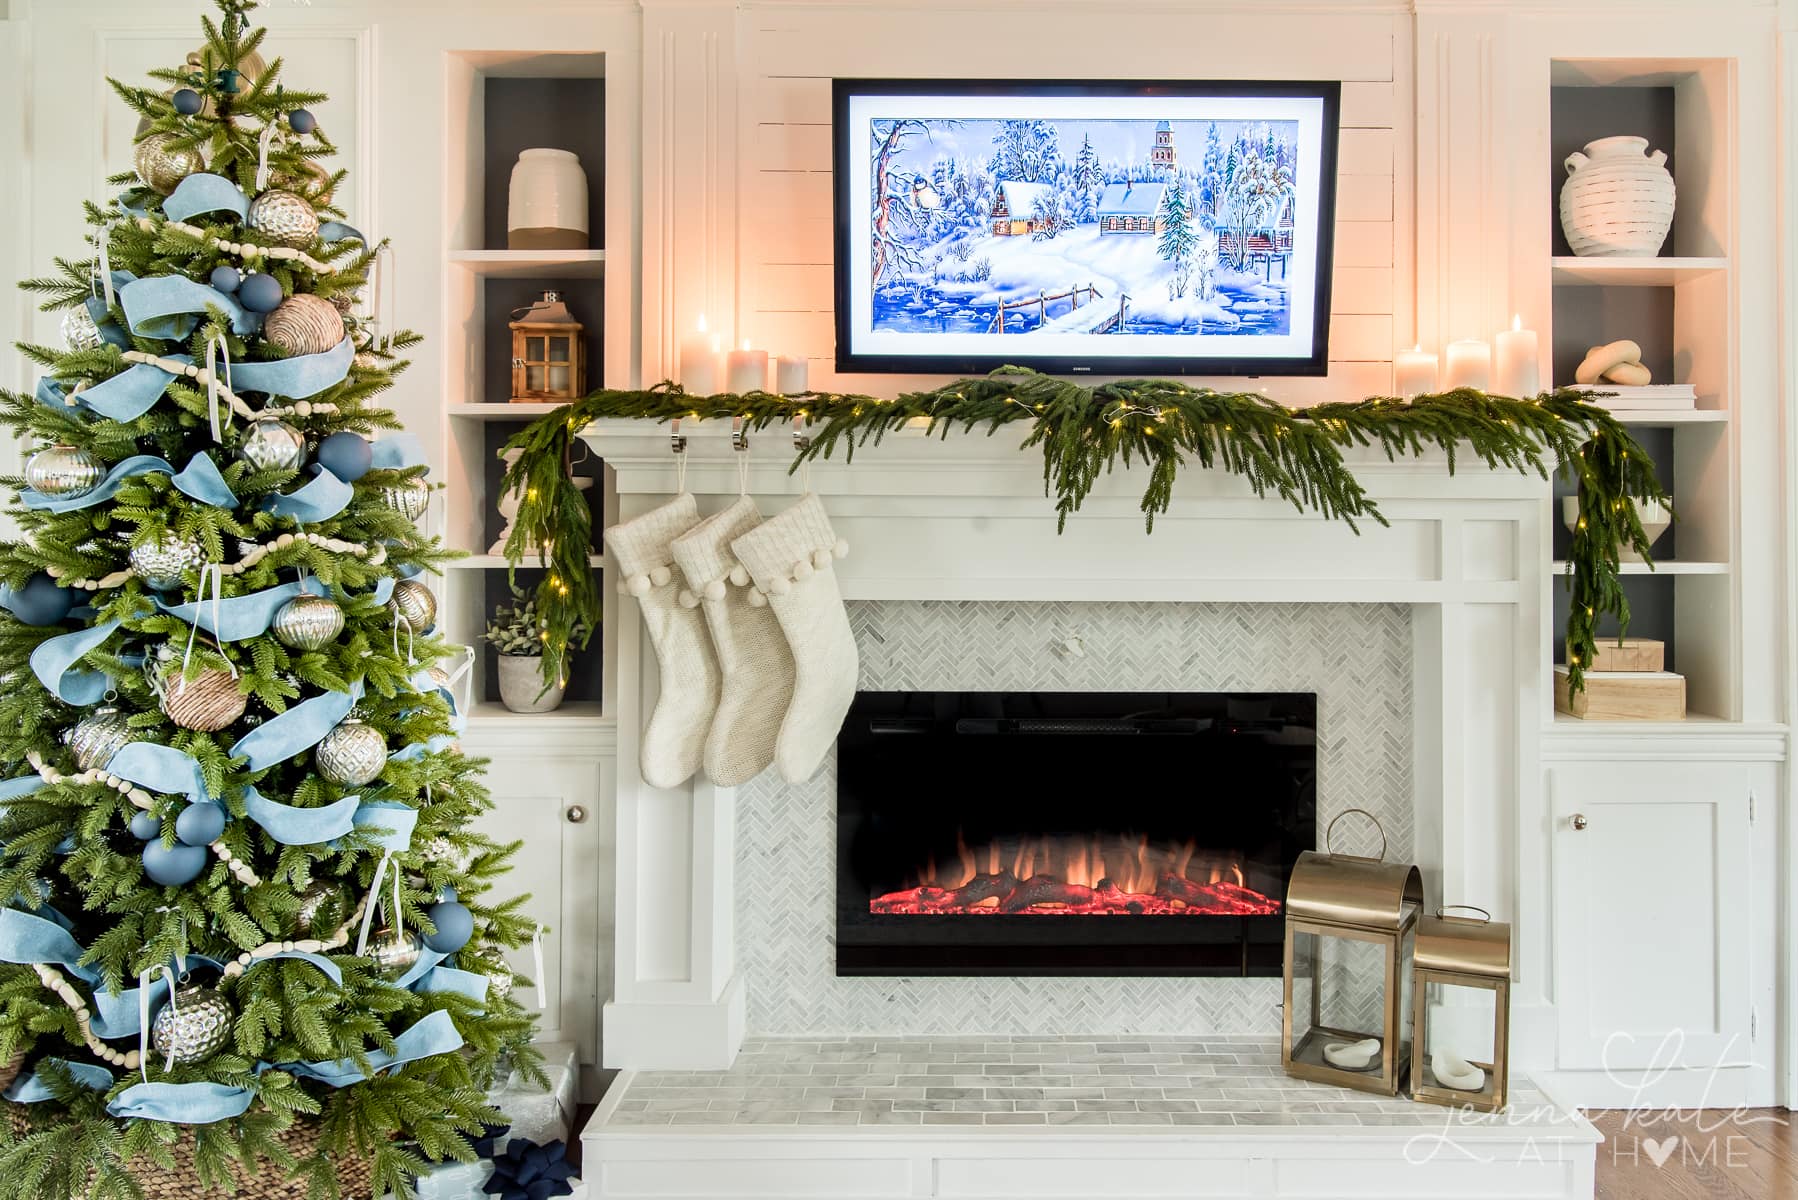 A Christmas mantel with white and cream stockings and greenery down the top. A faux Christmas tree wrapped with blue ribbon and blue and gold ornaments.